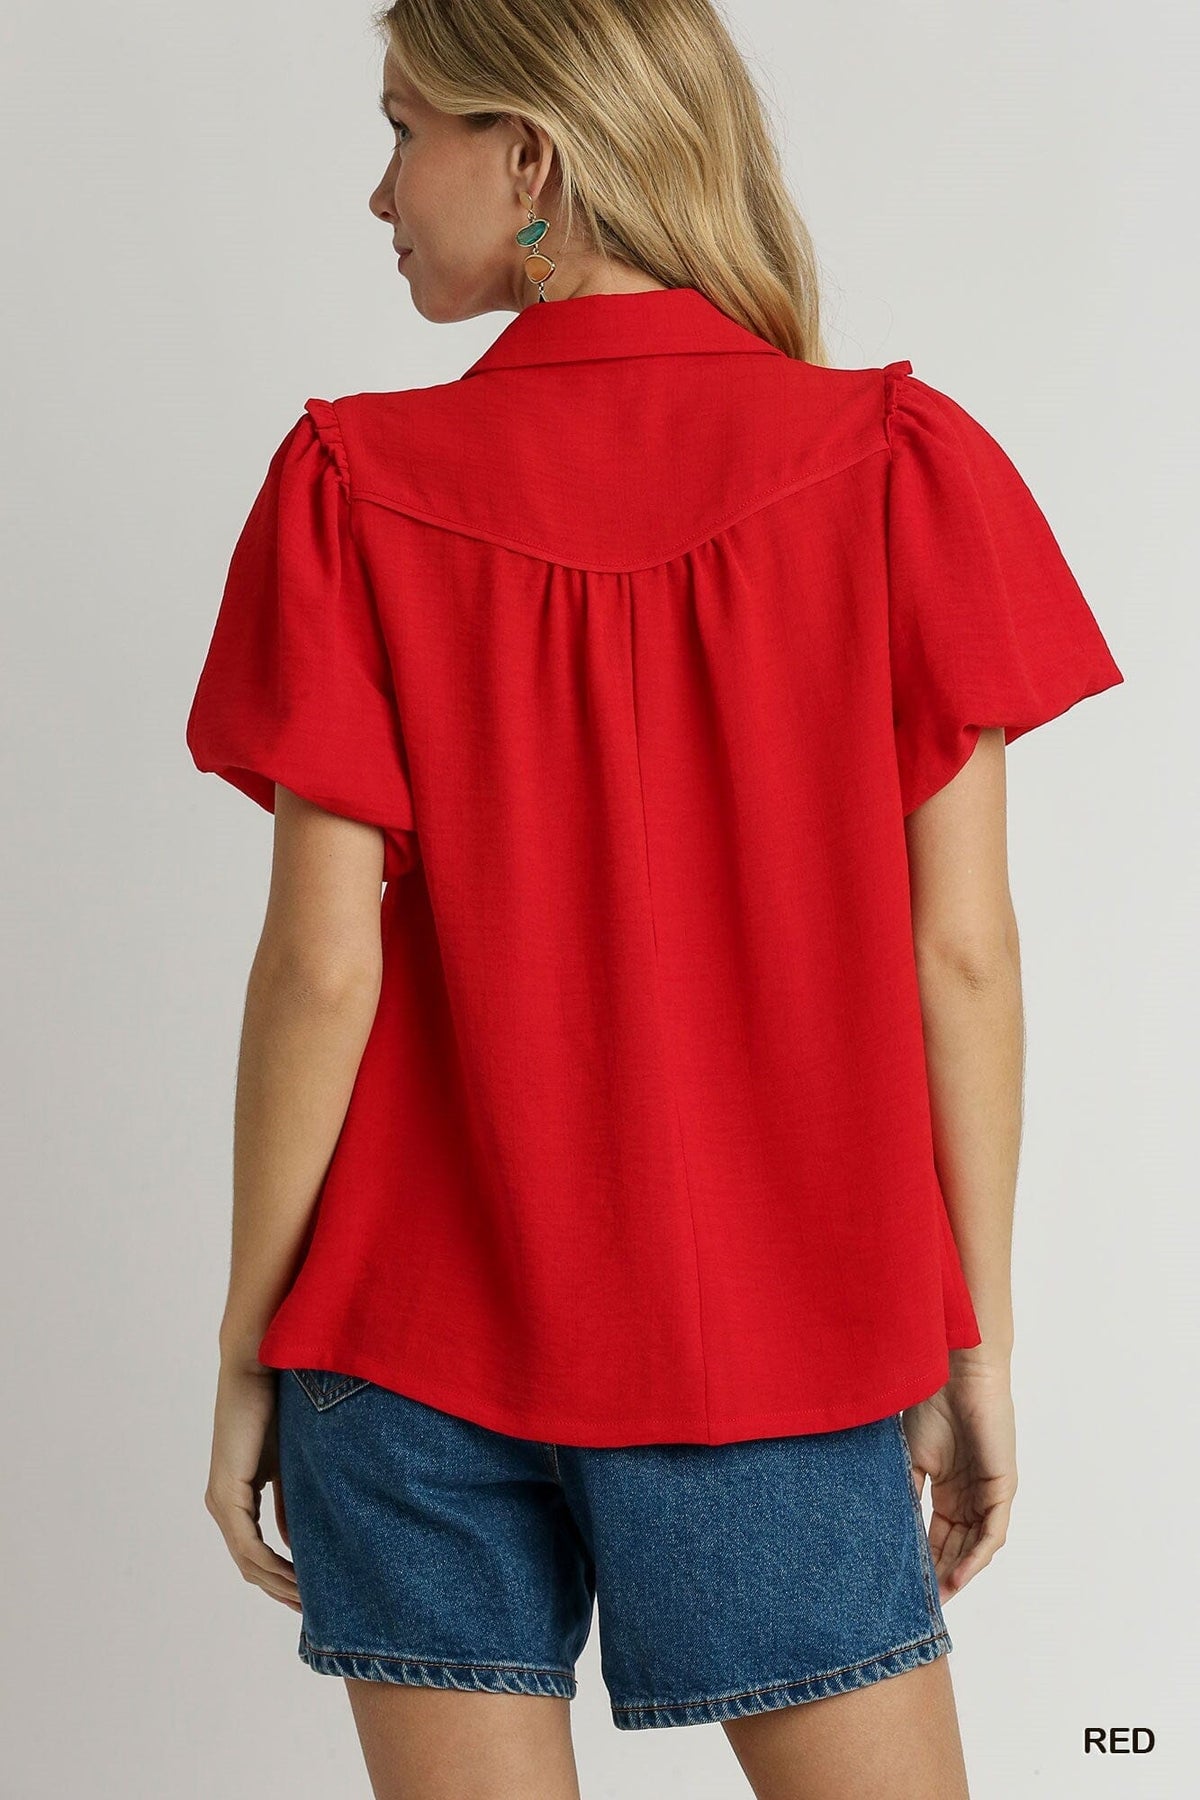 Now or Never Red Button Up Top - Caroline Hill